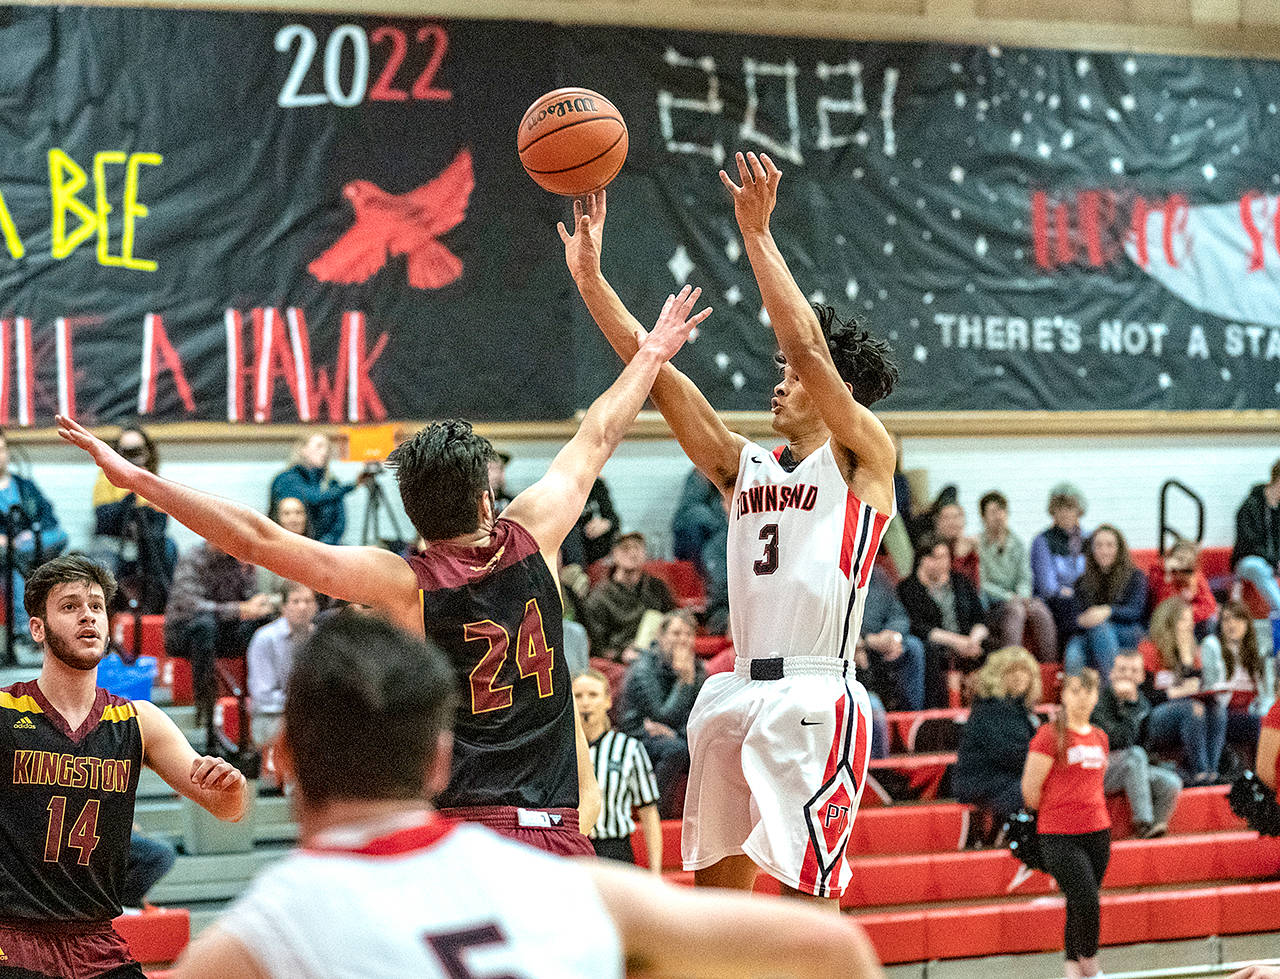 Steve Mullensky/for Peninsula Daily News Port Townsend’s Kavi Baabahar knocked down this jumper over Kingston’s Jack Hermanson during a game last week.